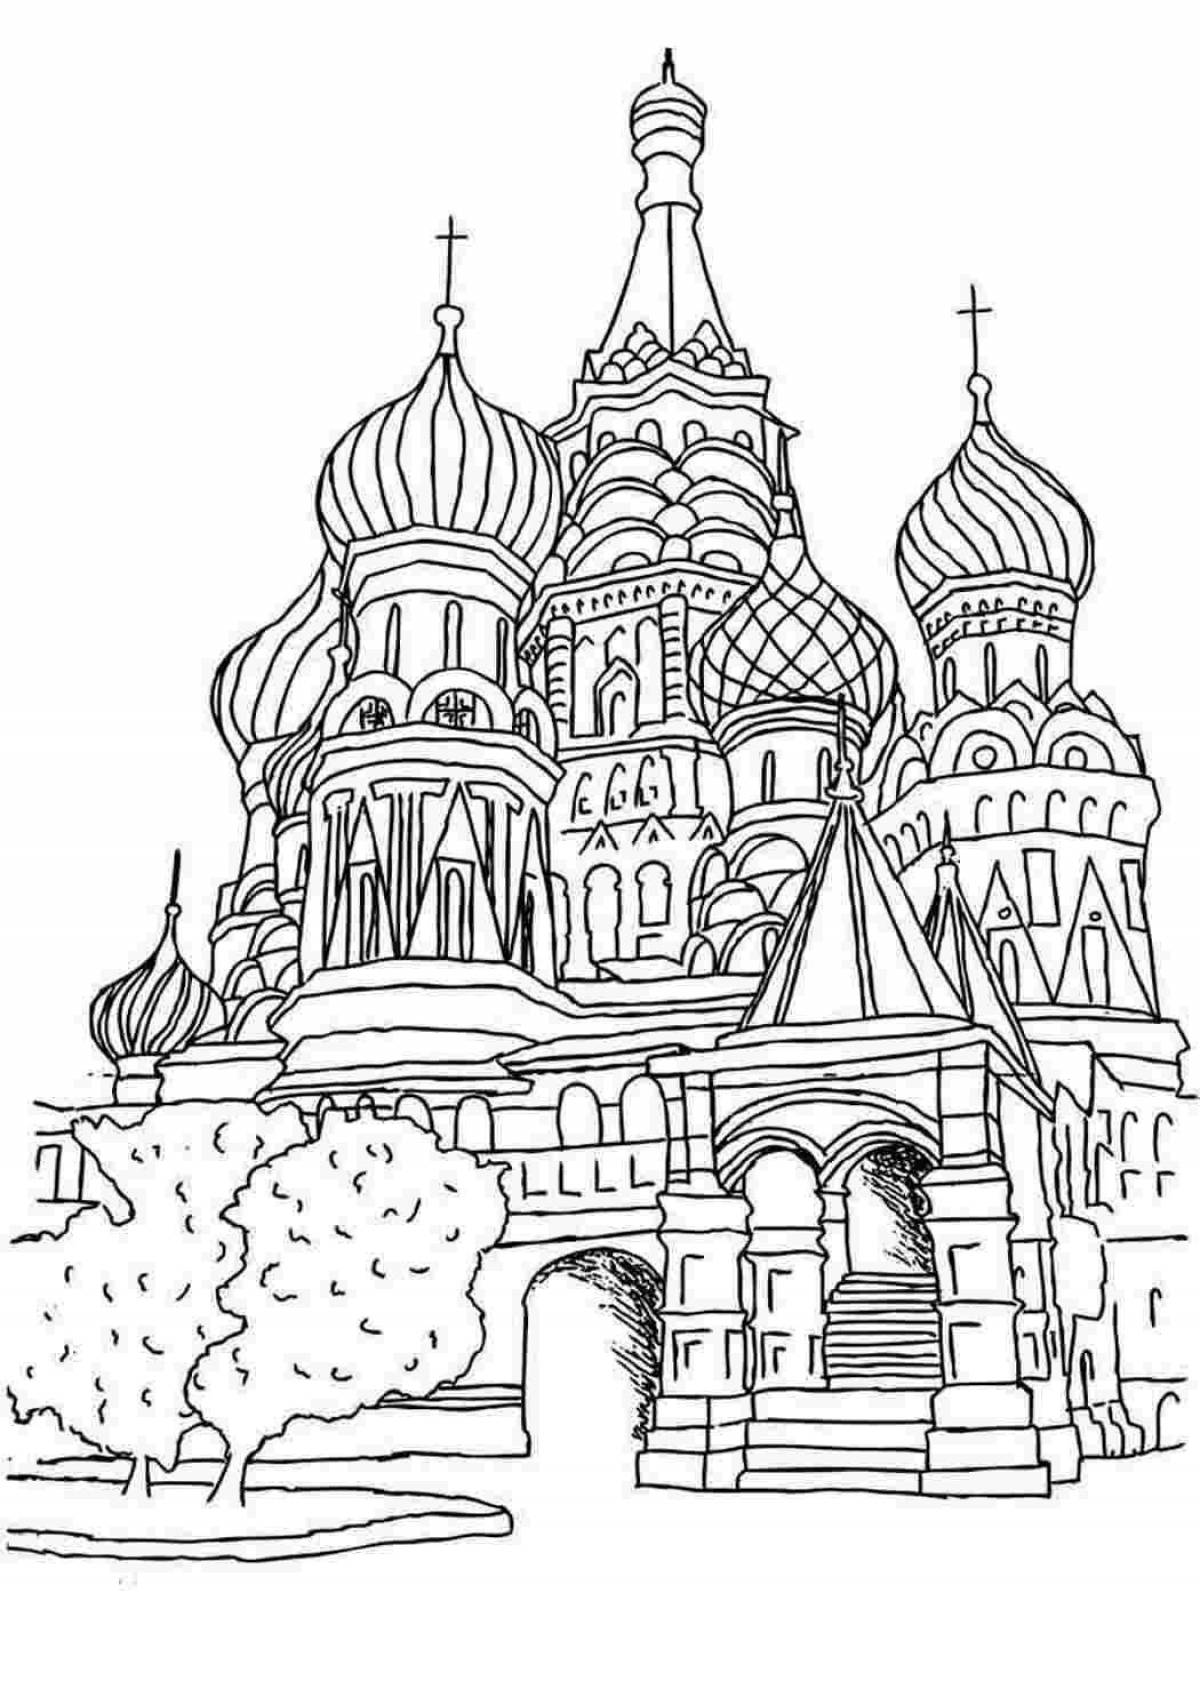 Coloring page dazzling saint basil's cathedral